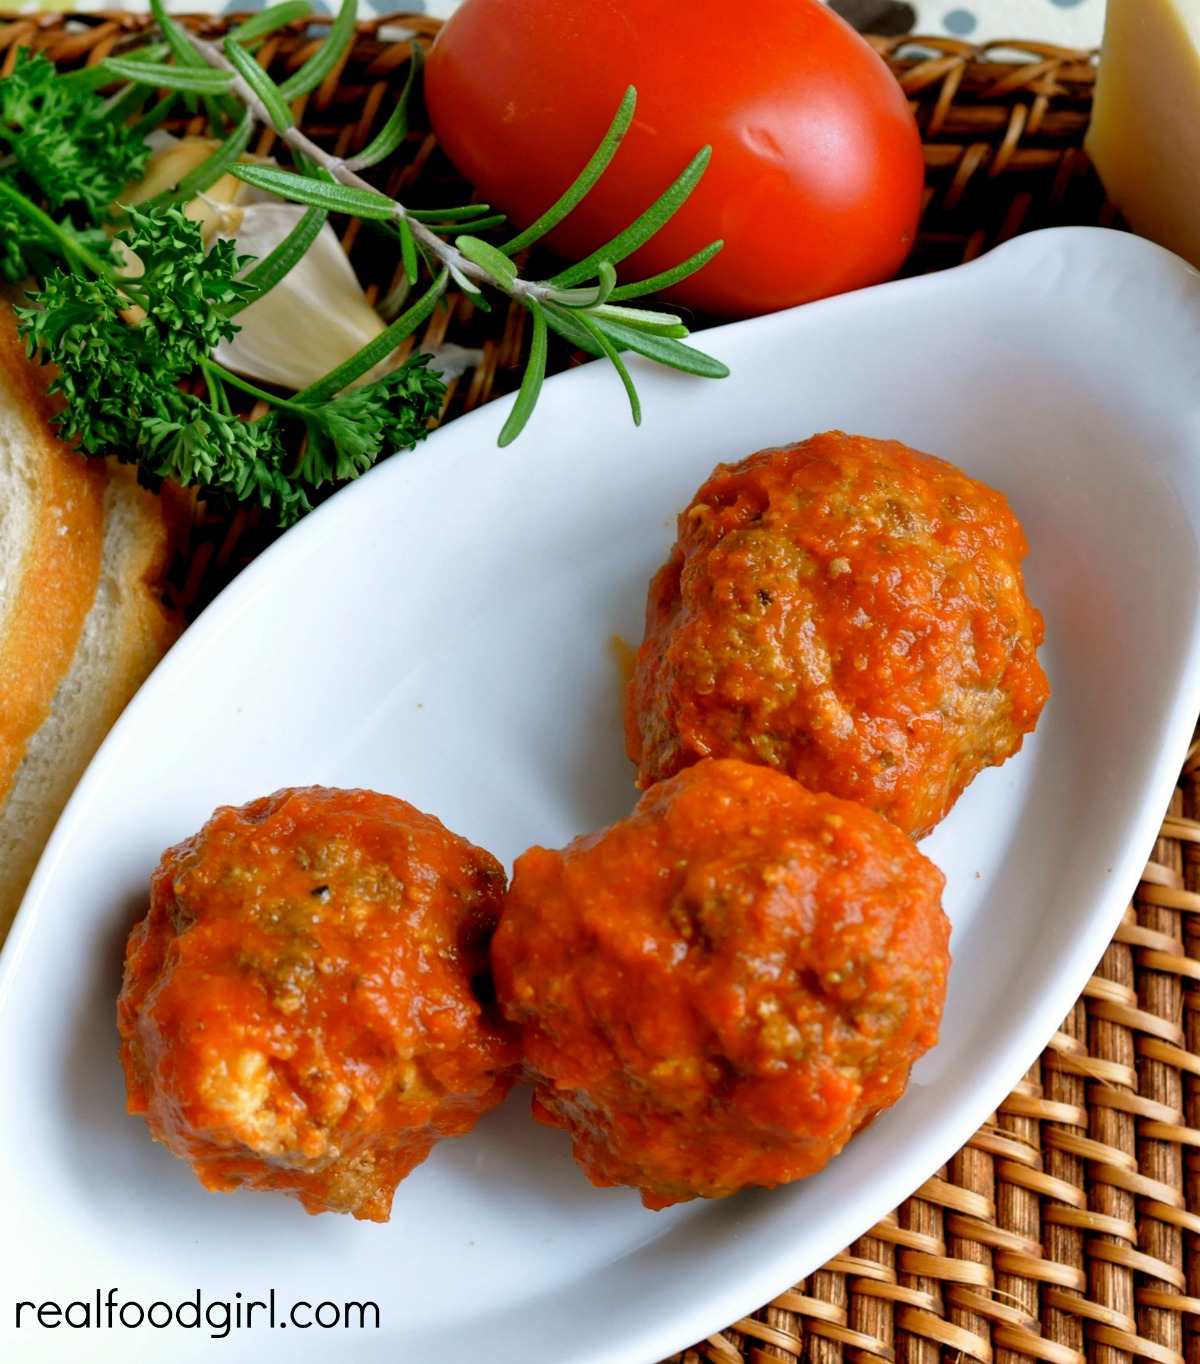 Veal, Pork and Ground Beef Meatballs from Real Food Girl. This is as authentic as it gets folks! If you want great meatballs, this is THE recipe!  